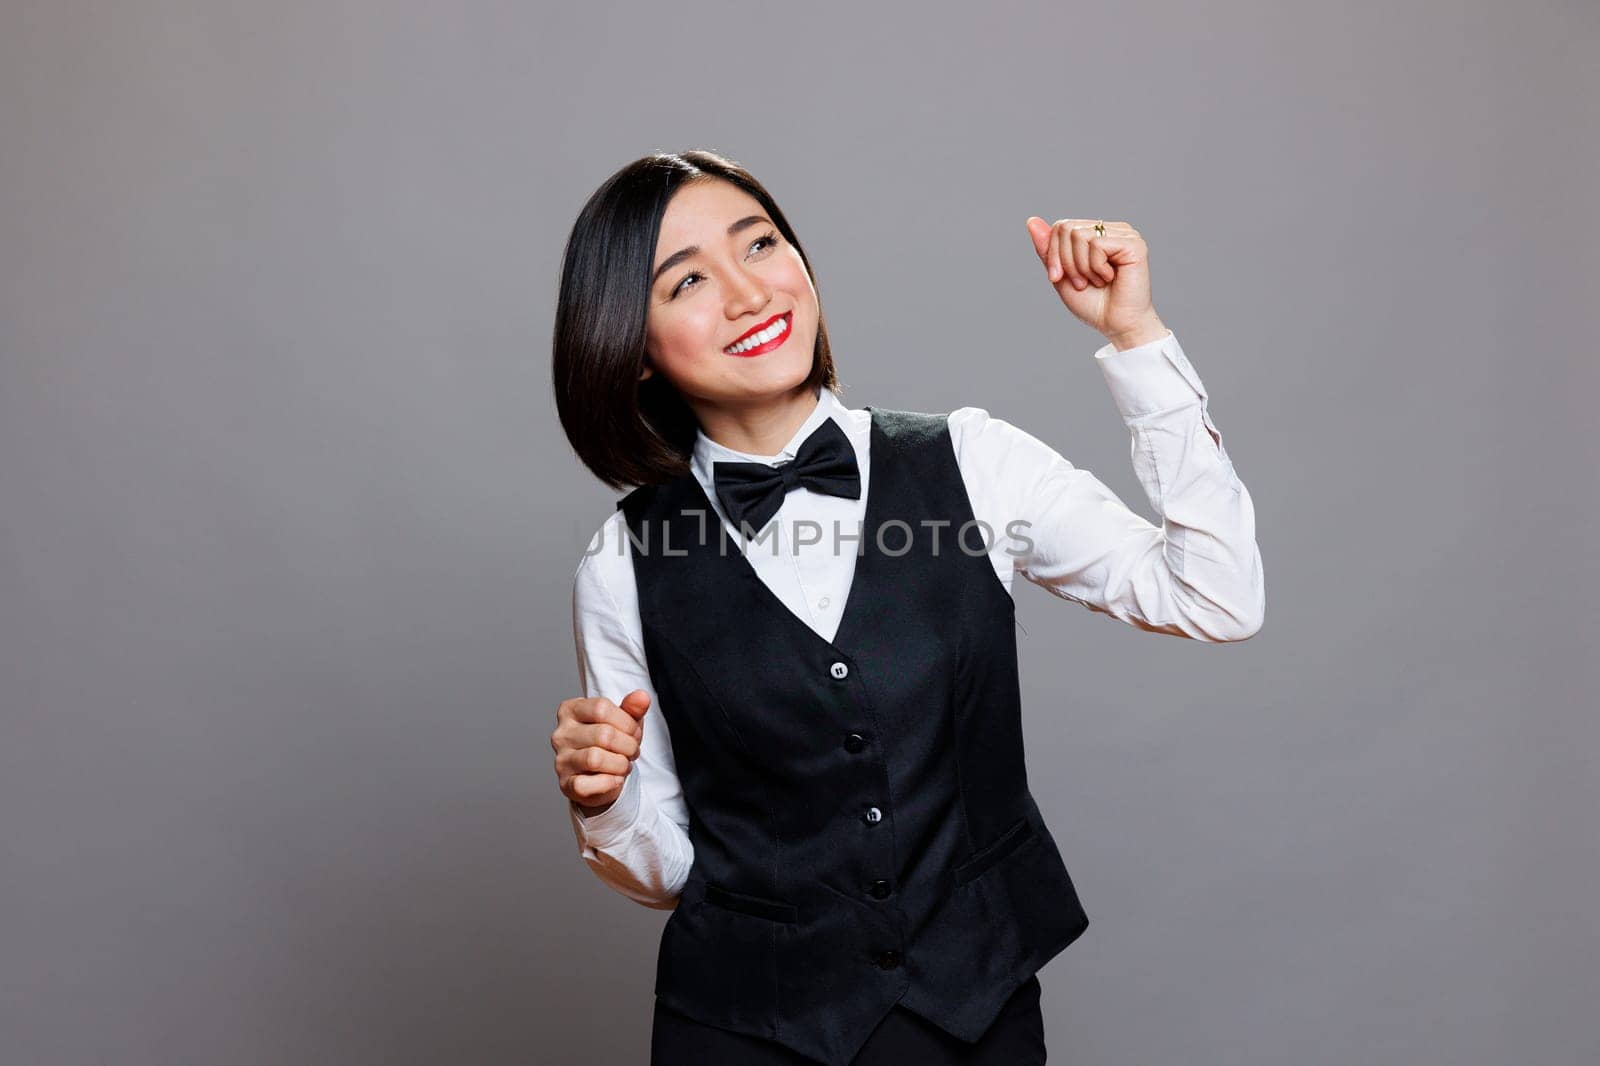 Attractive carefree asian woman receptionist wearing restaurant uniform joyfully dancing and having fun. Cheerful smiling young waitress moving arms to dynamic music beats